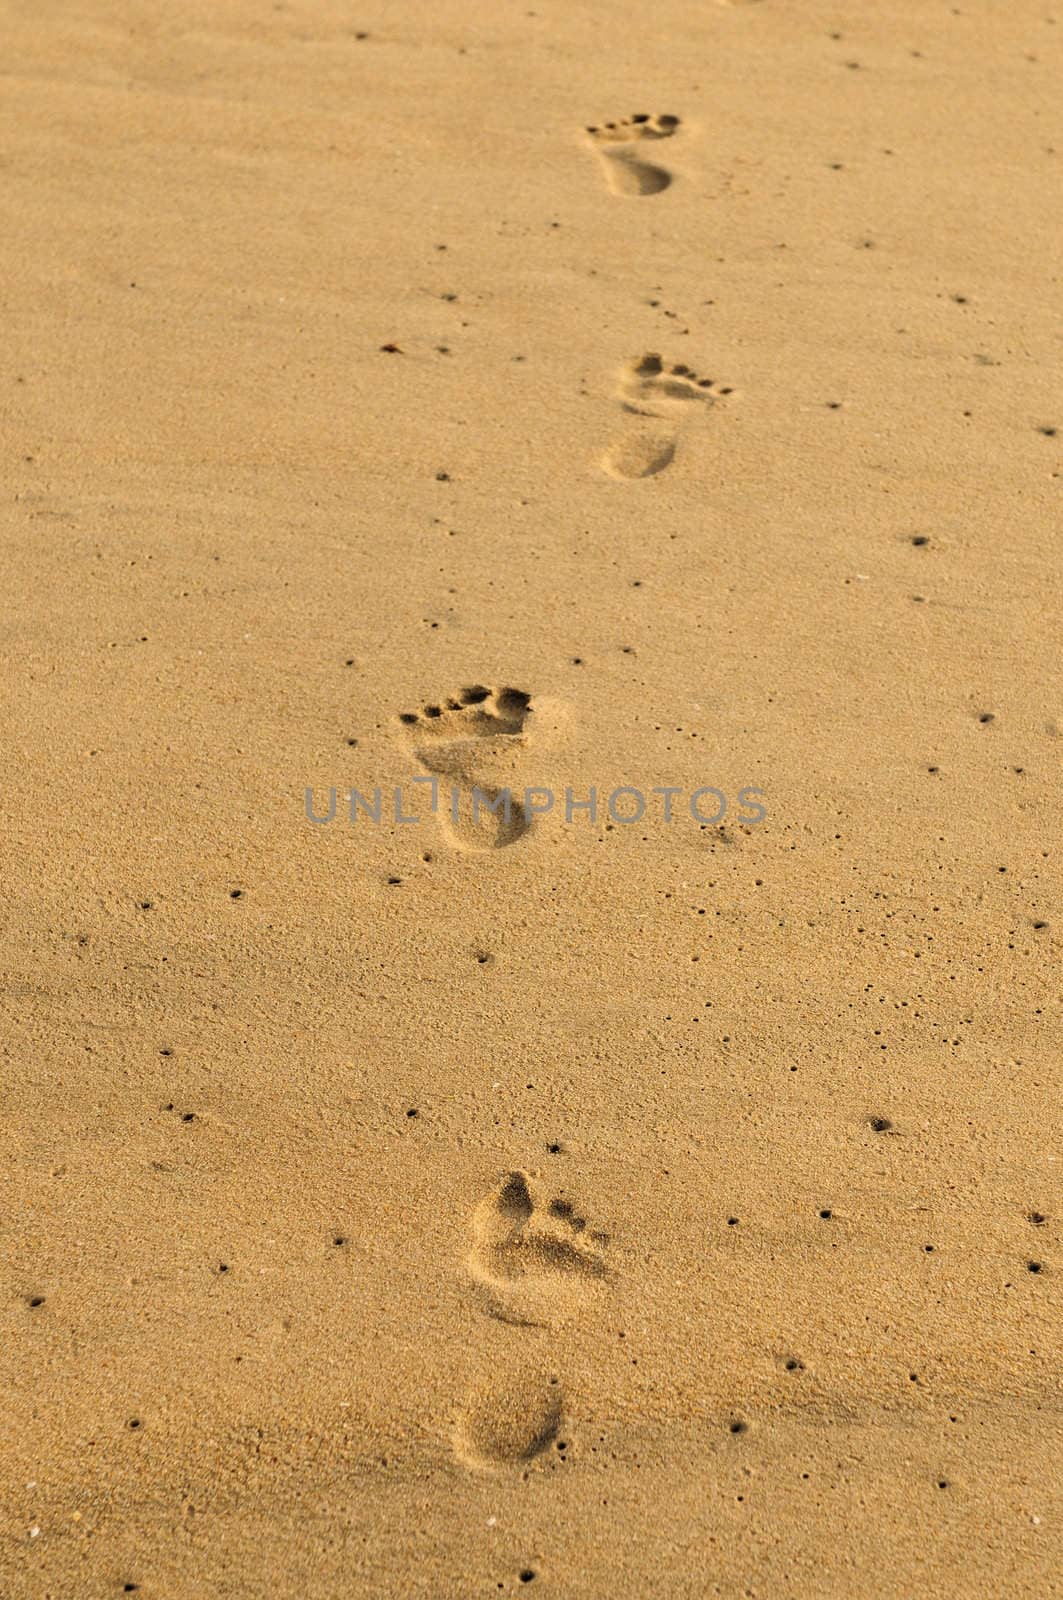 Set of footsteps on a beach sand 